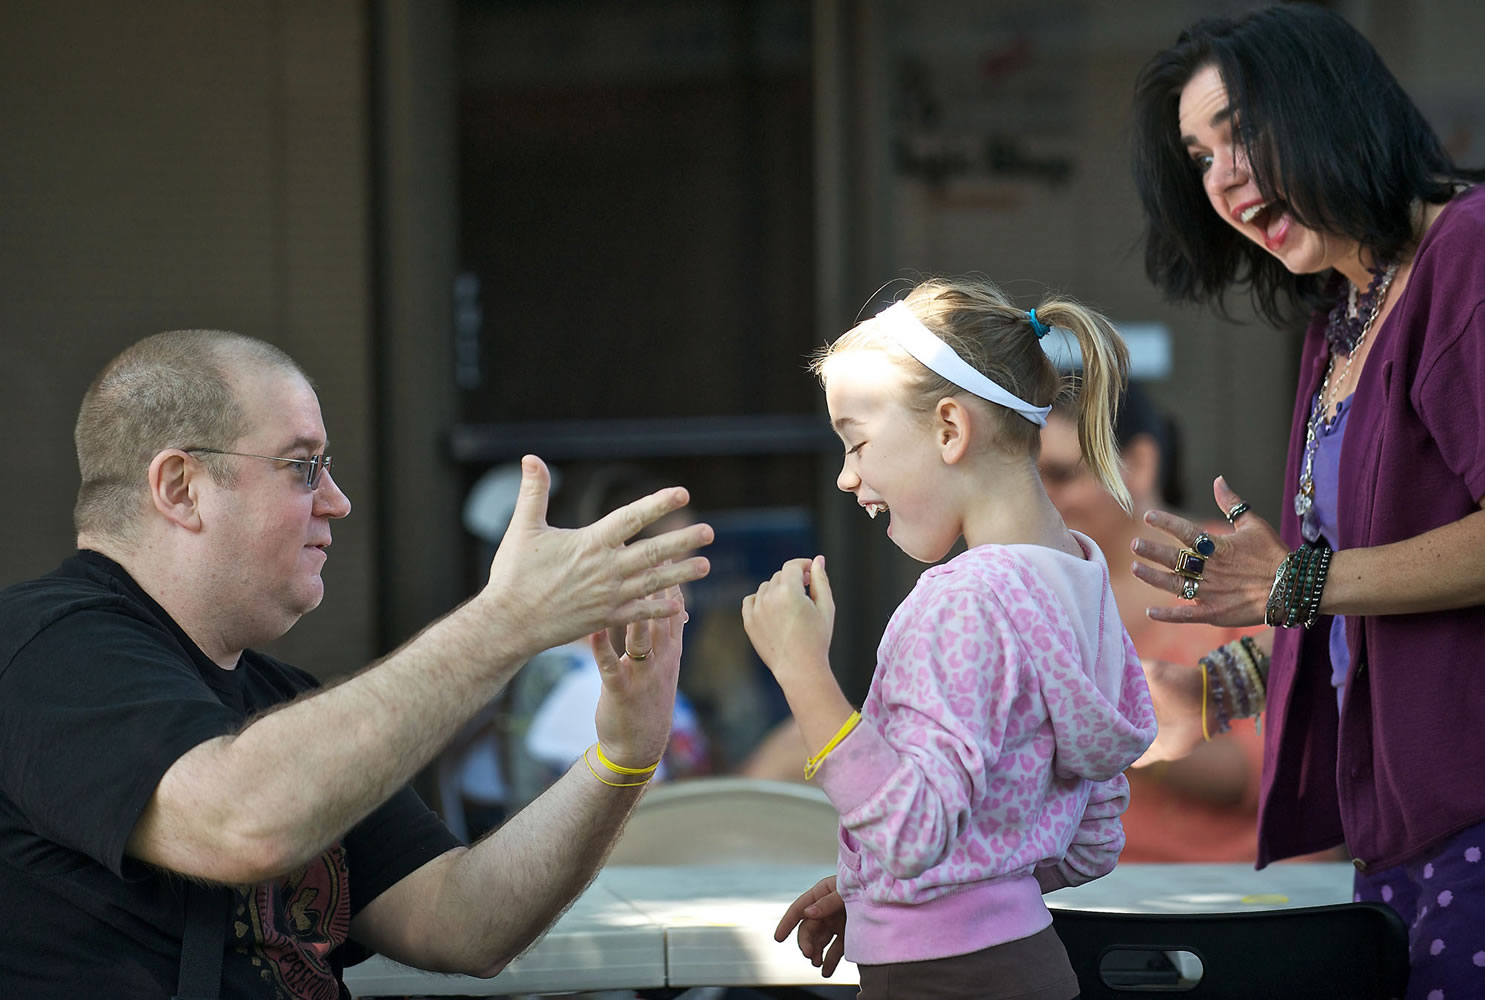 Dave Lemberg, owner of Dave's Killer Magic Shop, shows Taryn Larsen, 9, and her mother, Michele Larsen, a trick during a May 11 workshop in front of his Vancouver shop.